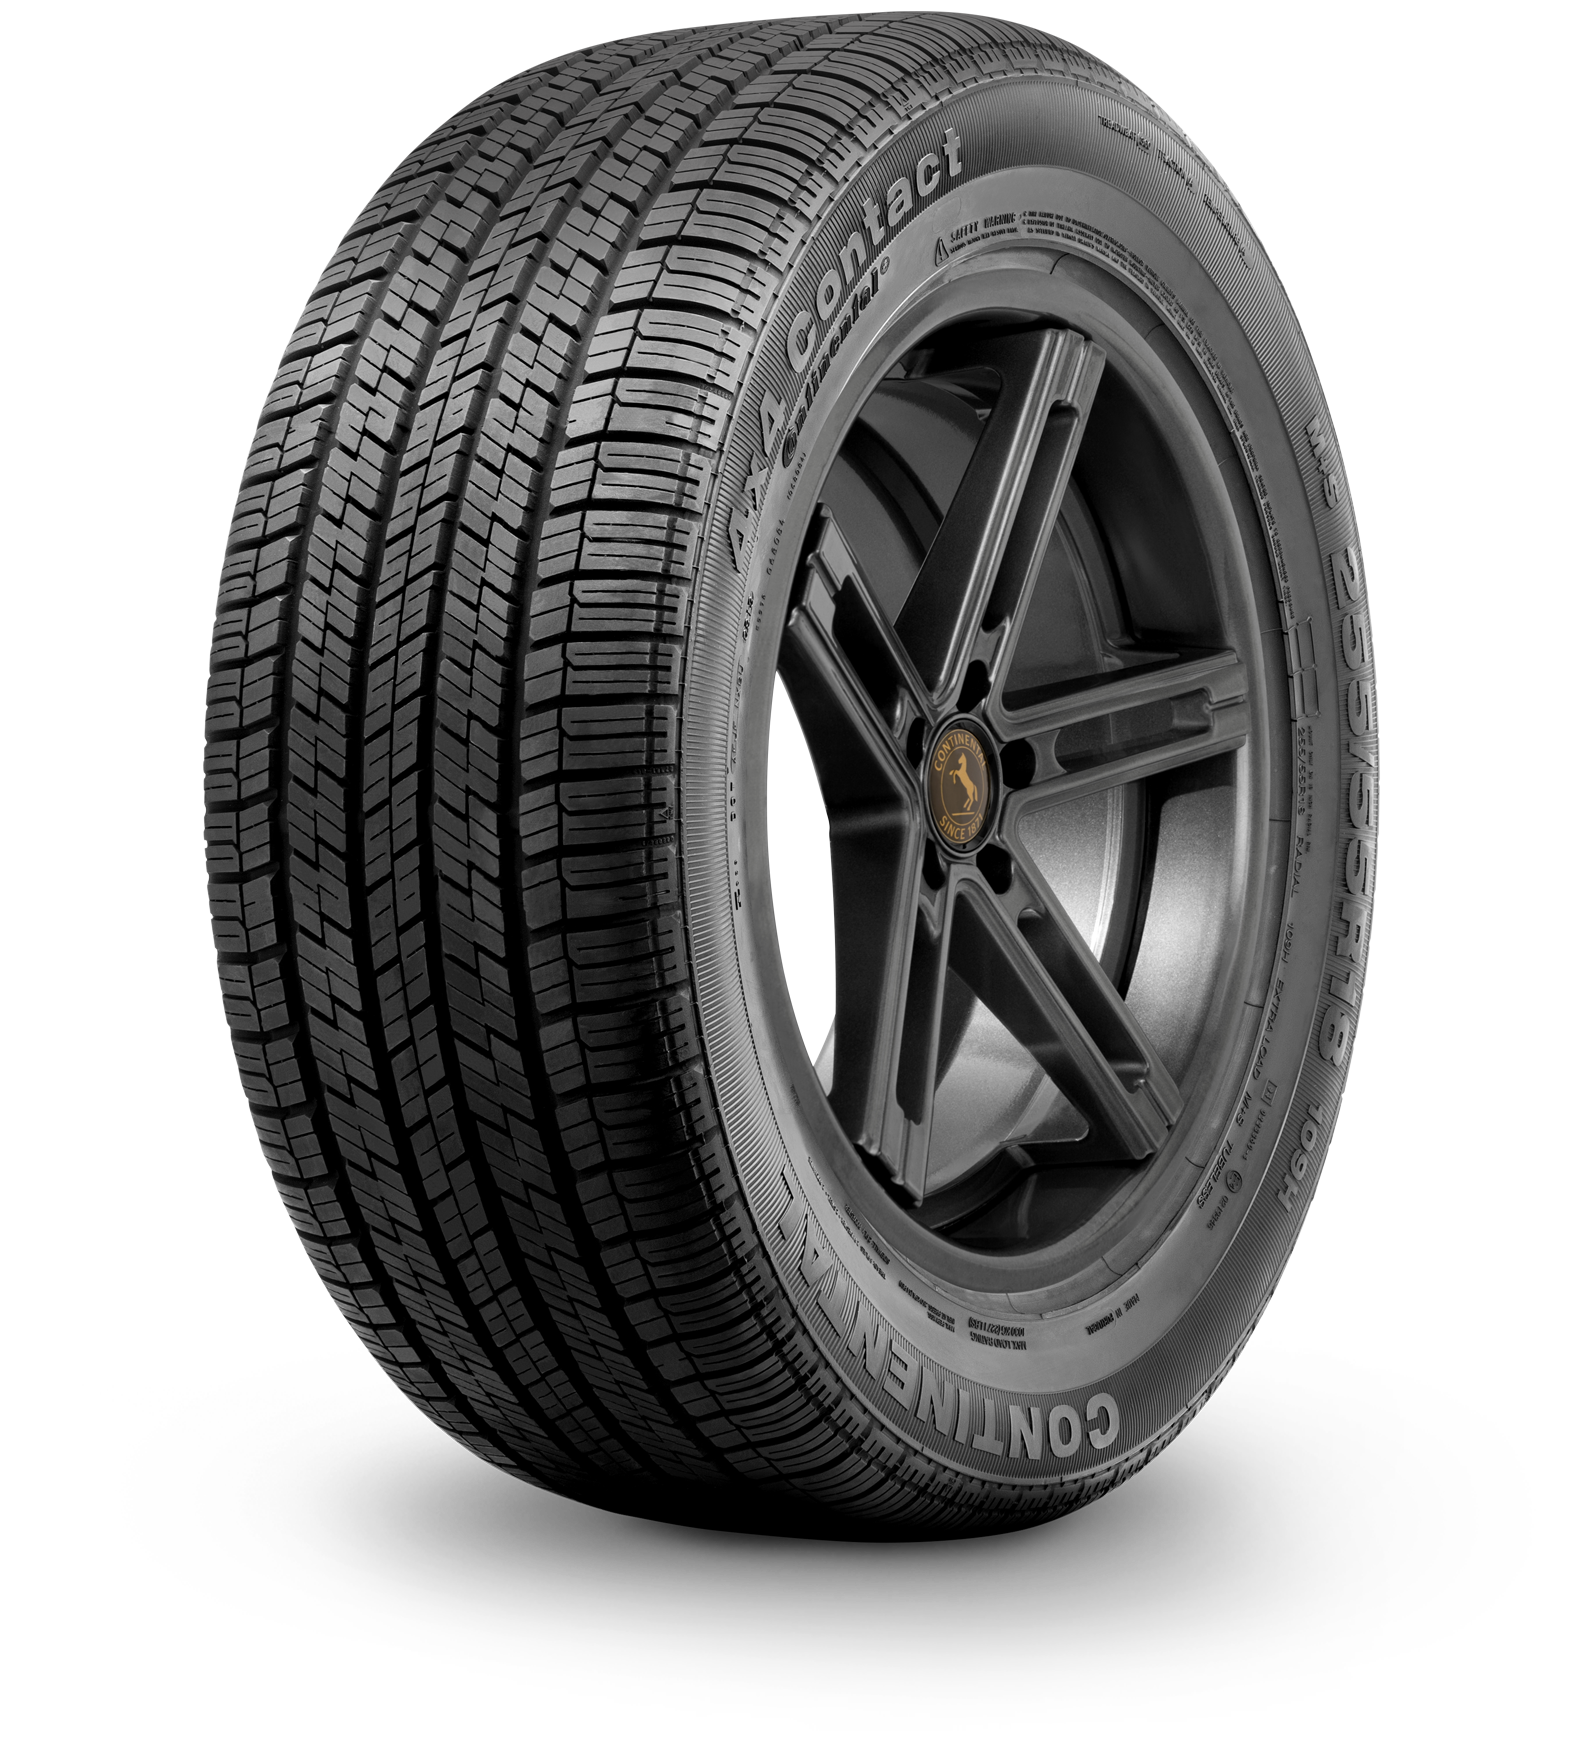 4x4Contact™ | Continental Tire